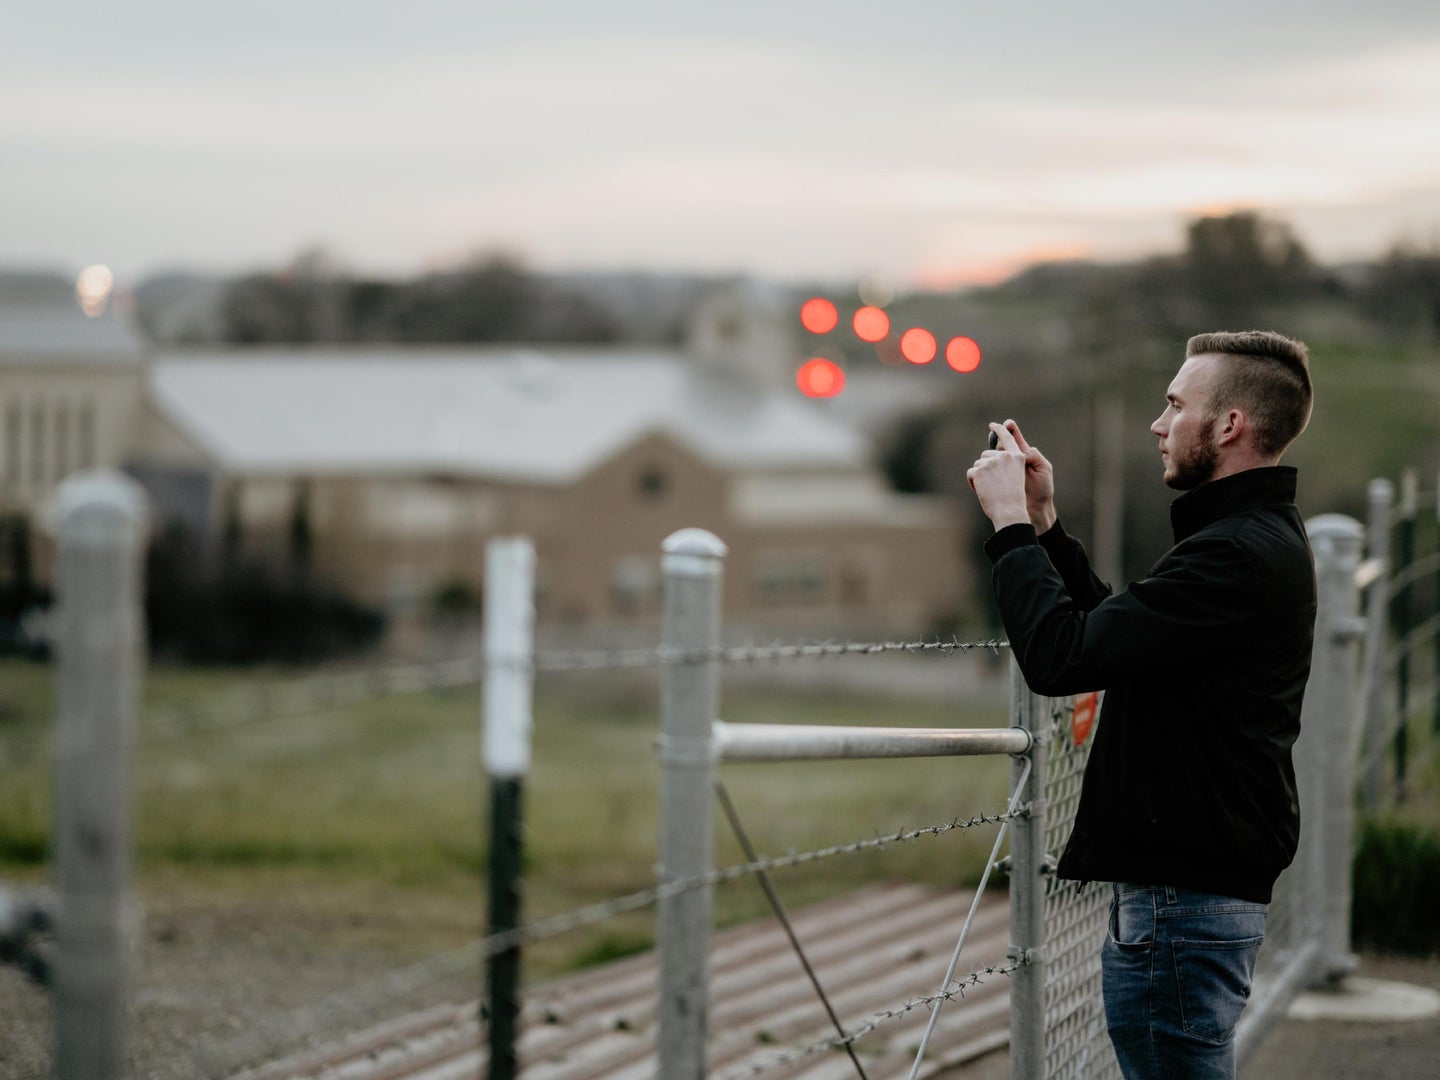 A man standing by a fence, taking a photo on an iPhone.